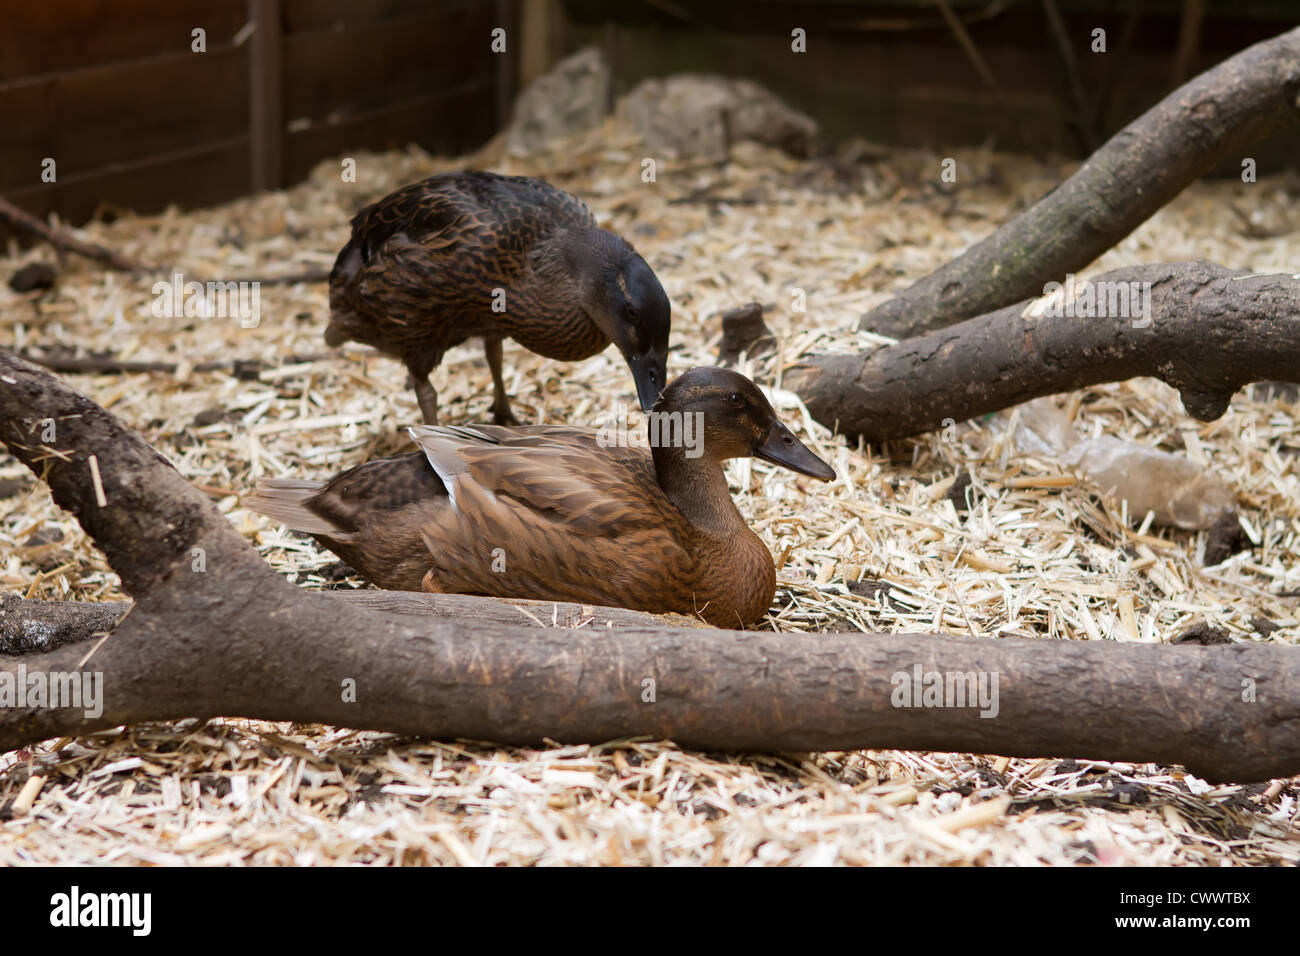 A pair of pet Khaki Campbell ducks in the garden, one laying down Stock Photo